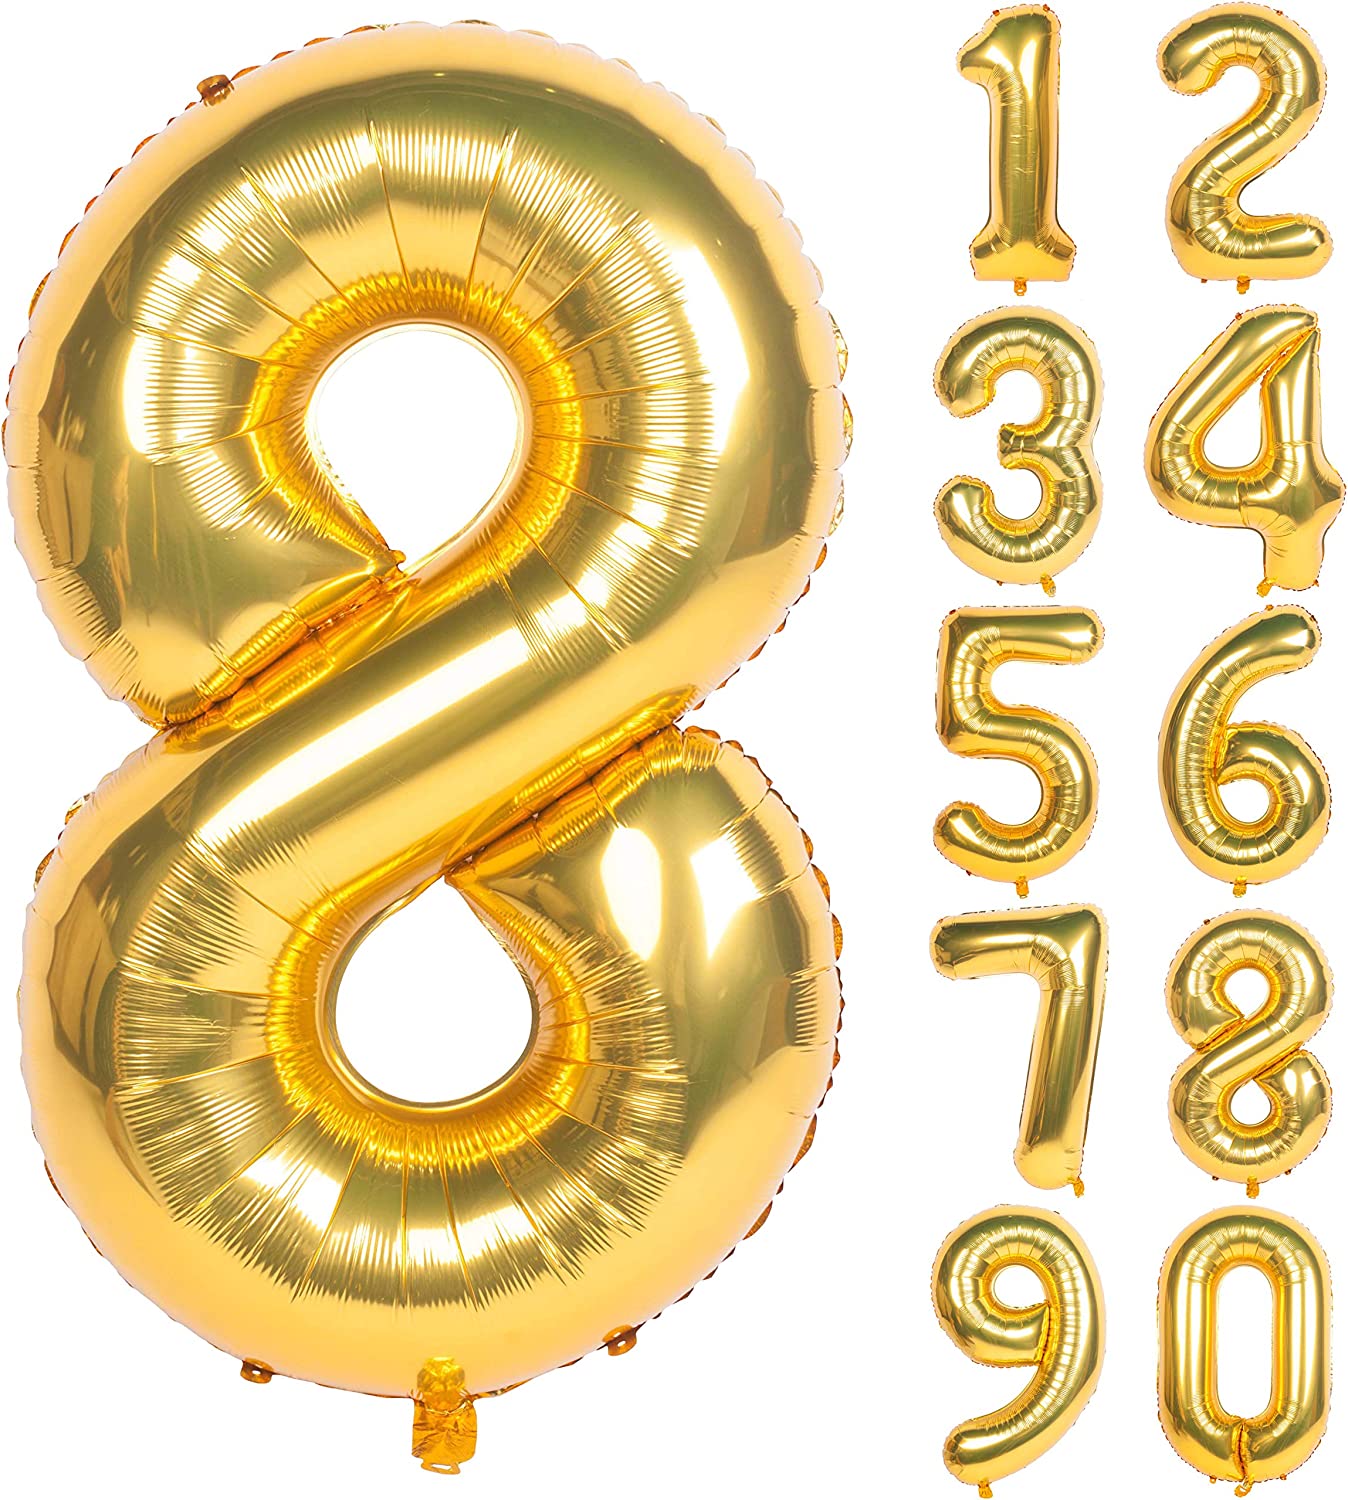 Gold Foil Number 8 balloon 40"